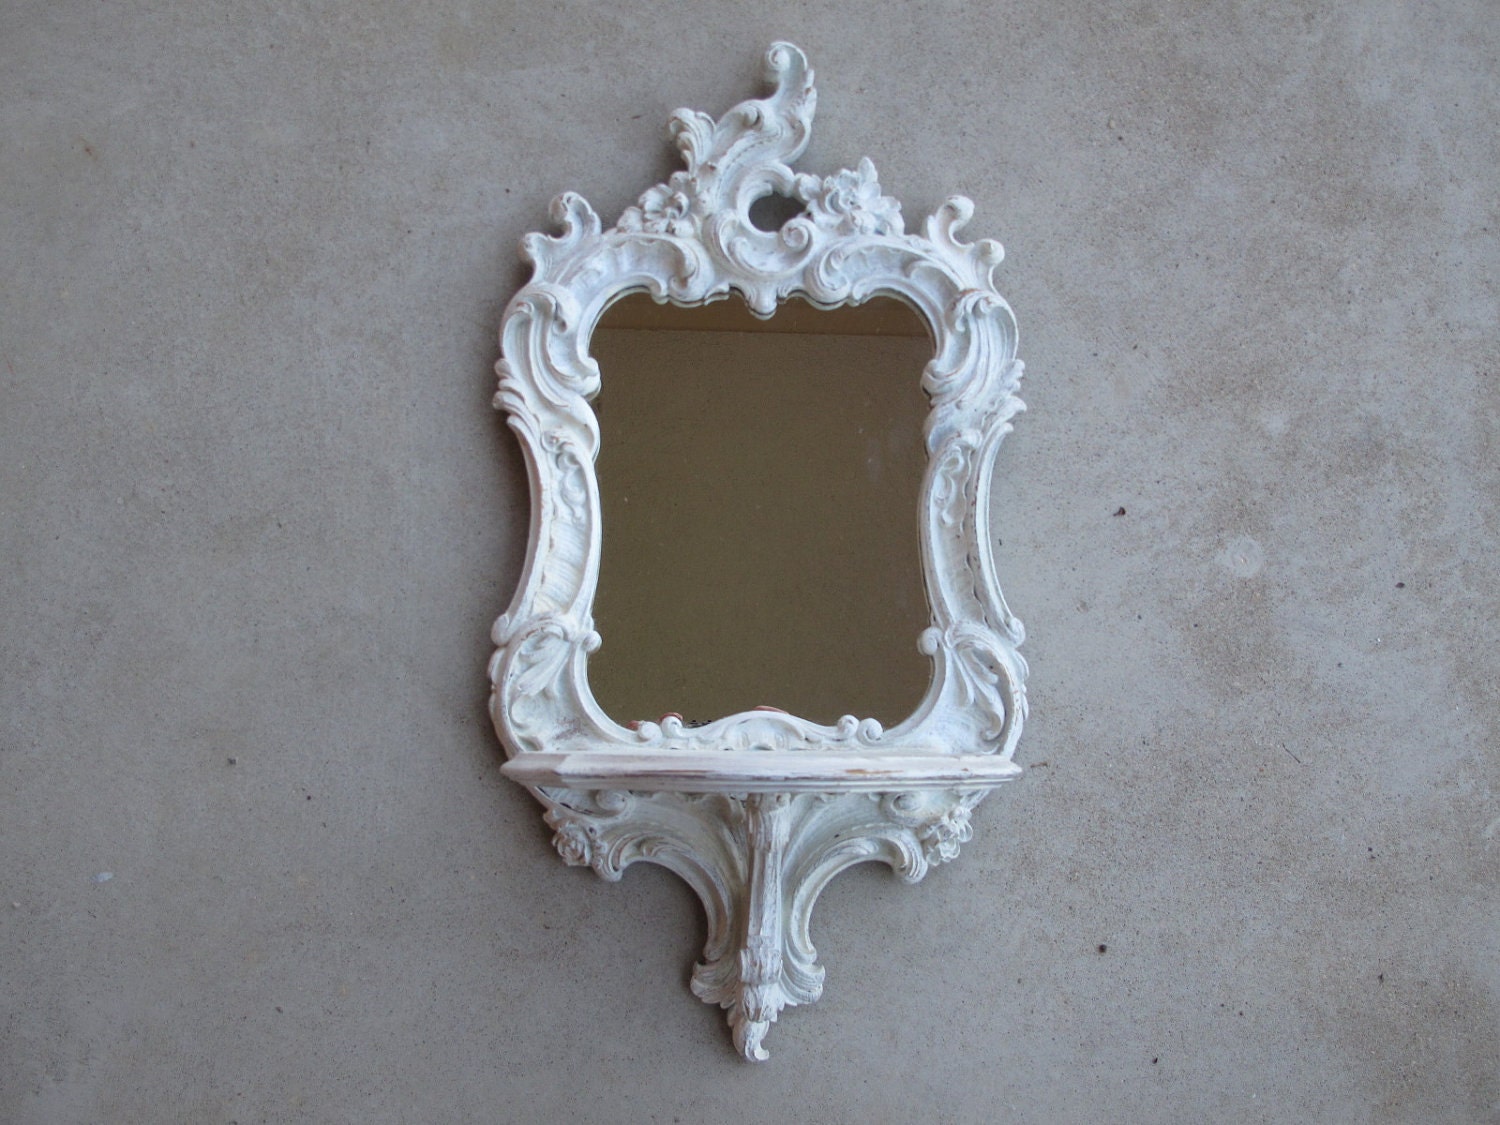 Vintage Shabby Chic Ornate Wall Mirror / Wall Mirror with Shelf Made by Syroco Wood / Distressed, Home Decor, Wedding Decor